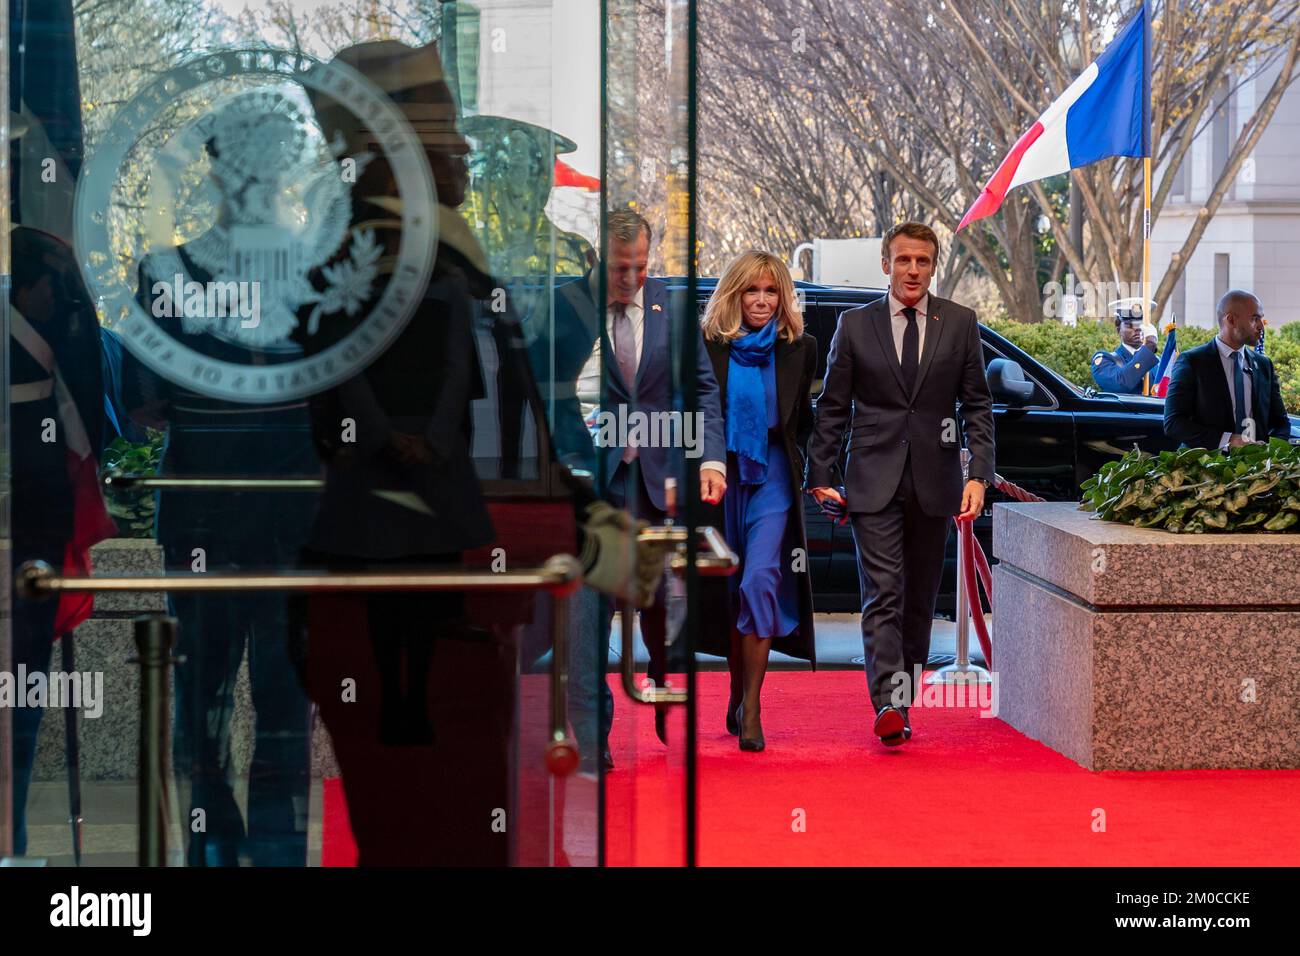 French President Macron and French First Lady Macron Arrive for the State Luncheon French President Emmanuel Macron and French First Lady Brigitte Macron arrive to attend the State Luncheon at the U.S. Department of State in Washington, D.C., on December 1, 2022. Stock Photo